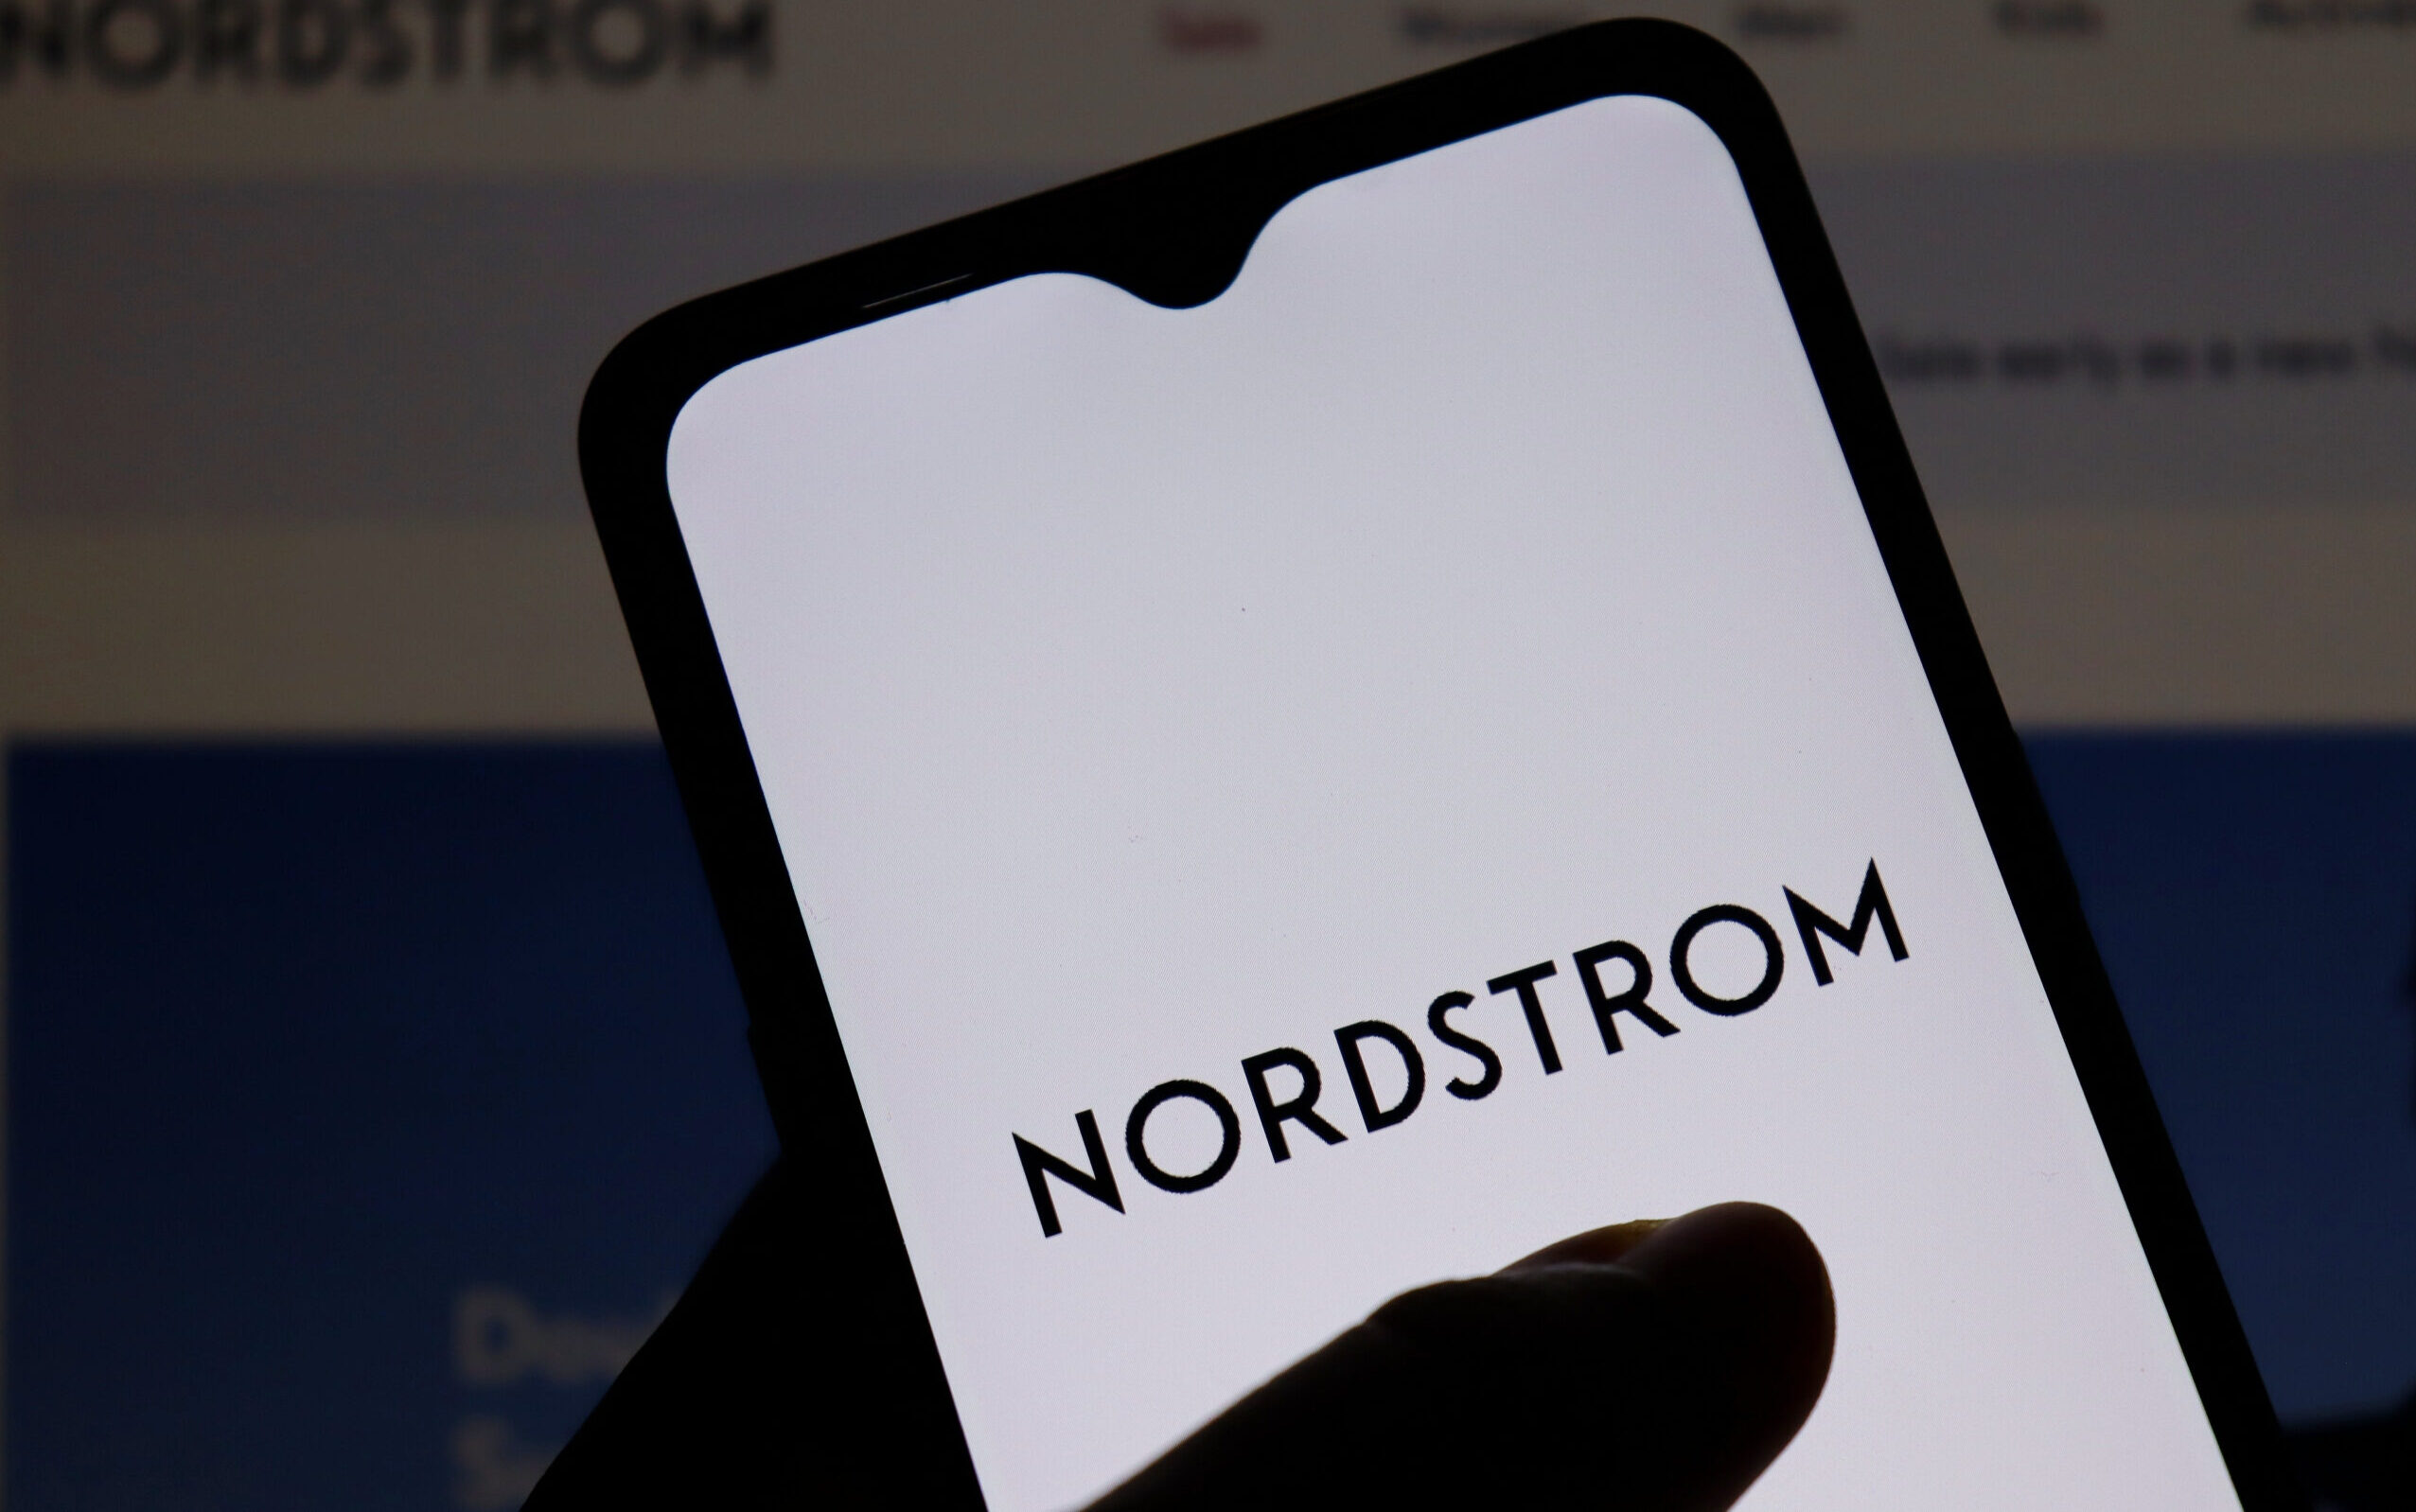 Holiday spirit to fight inflation: Nordstrom shares fall in power